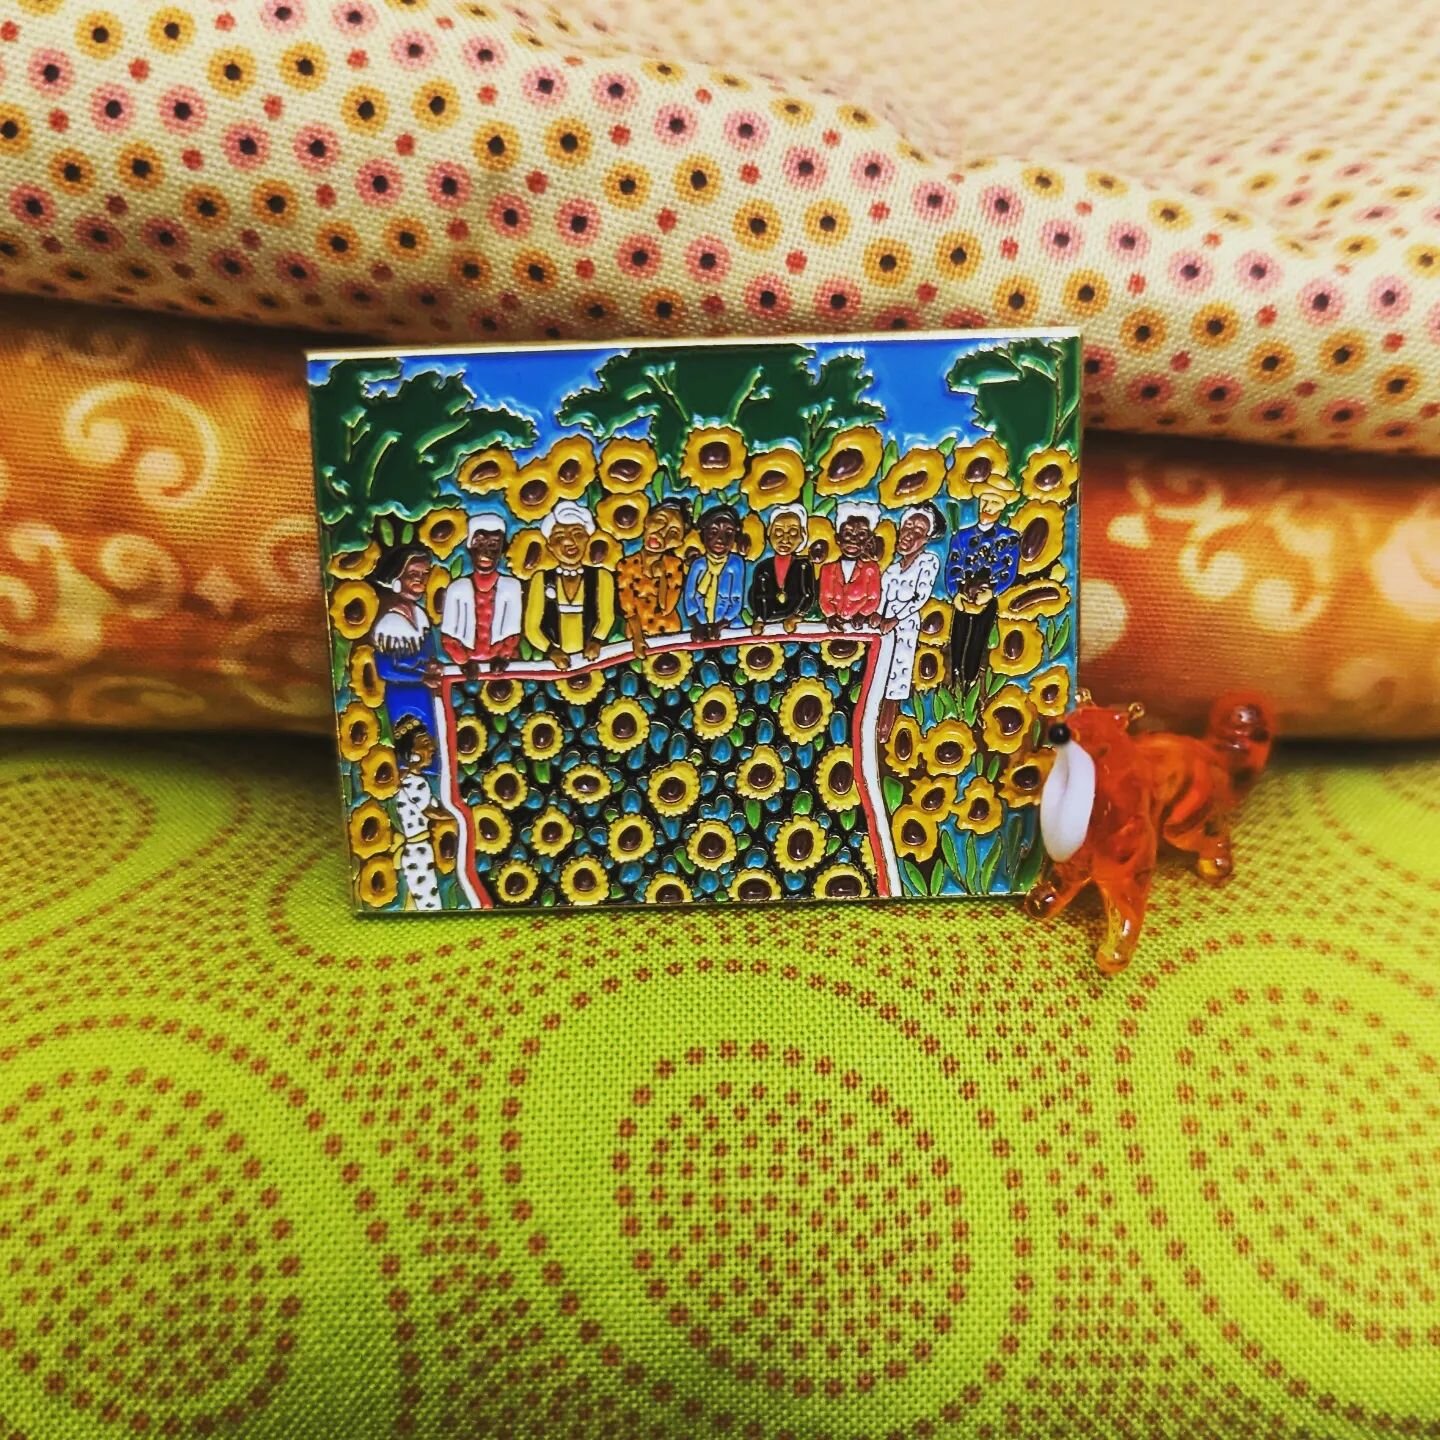 This enamel pin is a replica of the exquisite lithograph &quot;The Sunflower Quilting Bee at Arles&quot; by Faith Ringgold (1996).

The original lithograph resides at The Philadelphia Art Museum (@philamuseum ), although it is currently not on displa